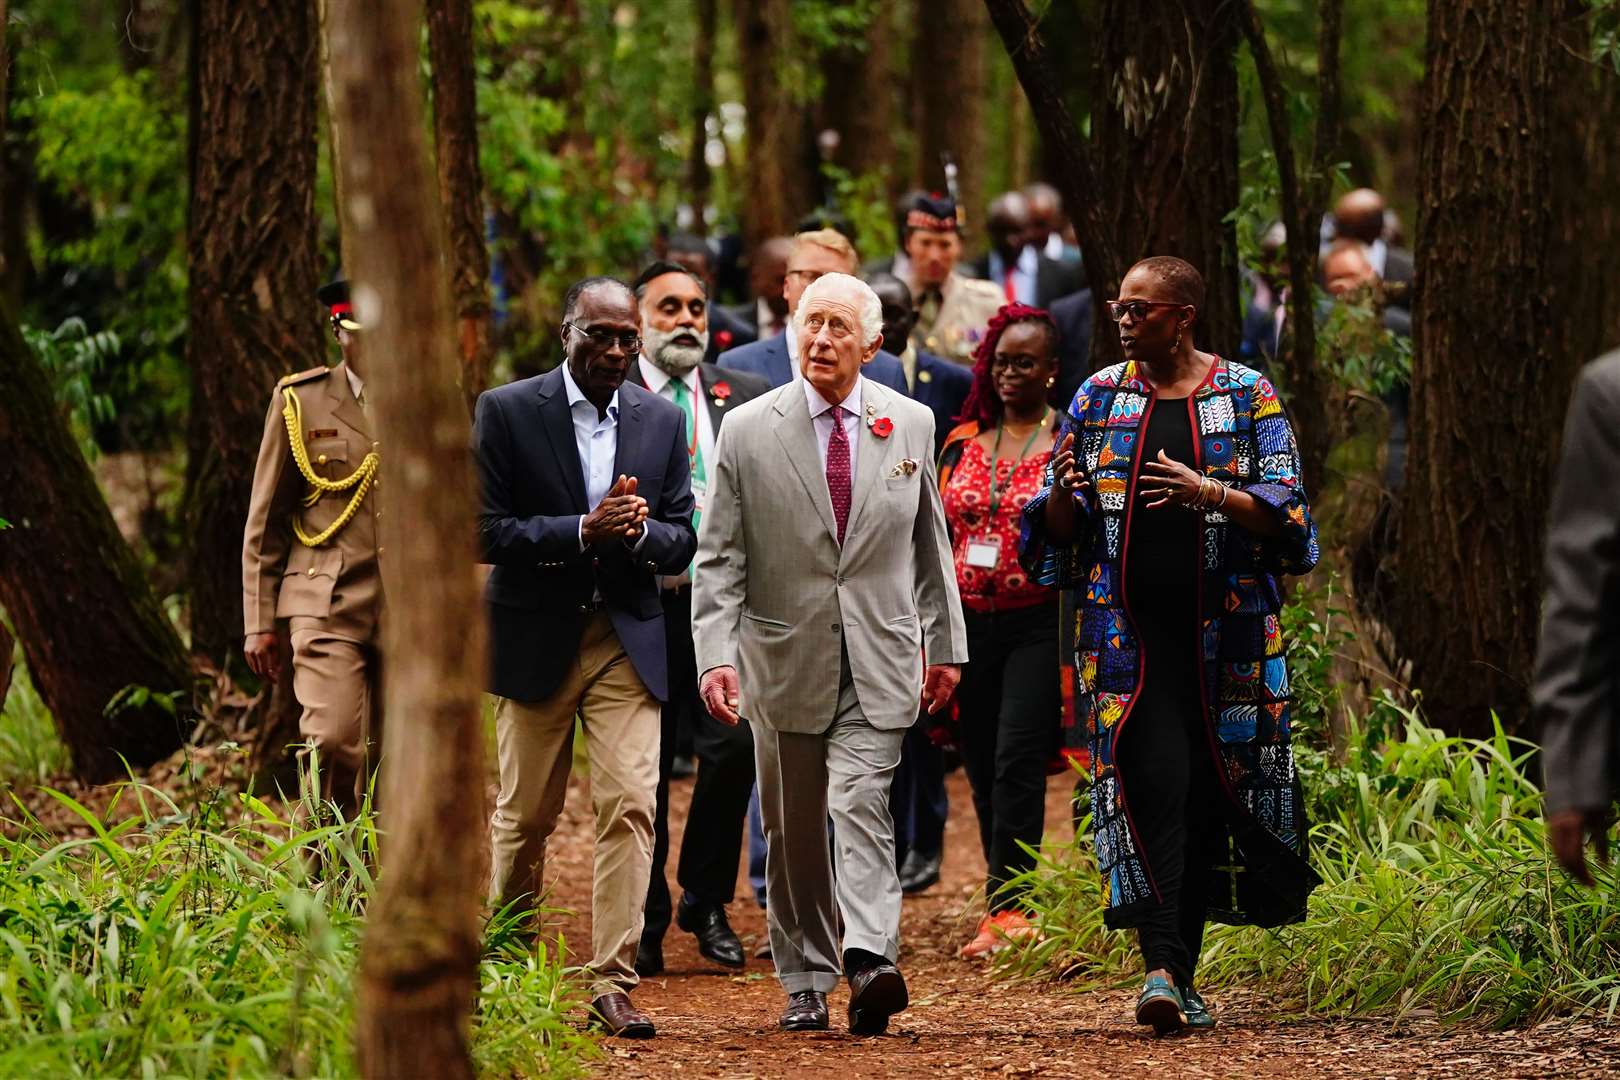 The King during a visit to Karura urban forest in Nairobi in November (Phil Noble/PA)